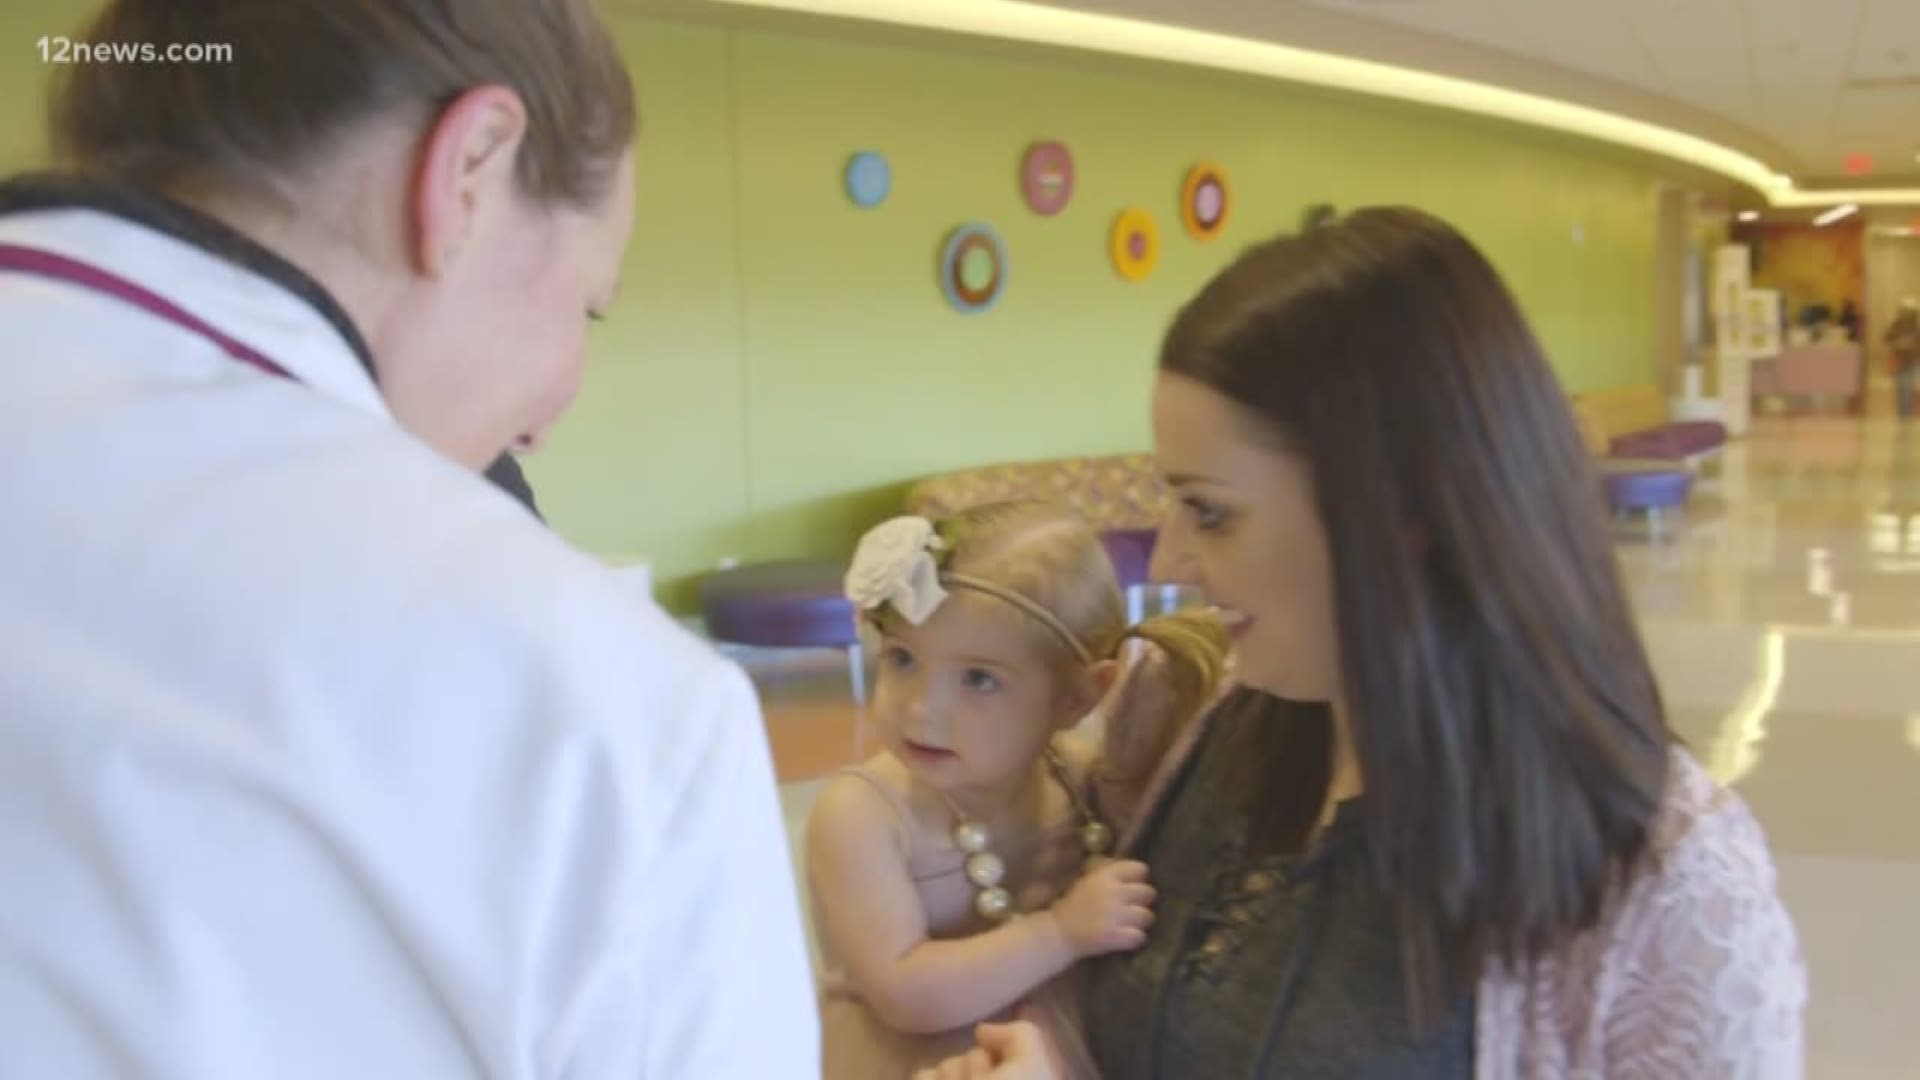 Tuesday's Day of Giving raises money that benefits Phoenix Children's Hospital, and for a Gilbert family, they couldn't be more thankful for those donations. Their daughter, Quinn, has been saved by doctors at PCH not once, but twice.